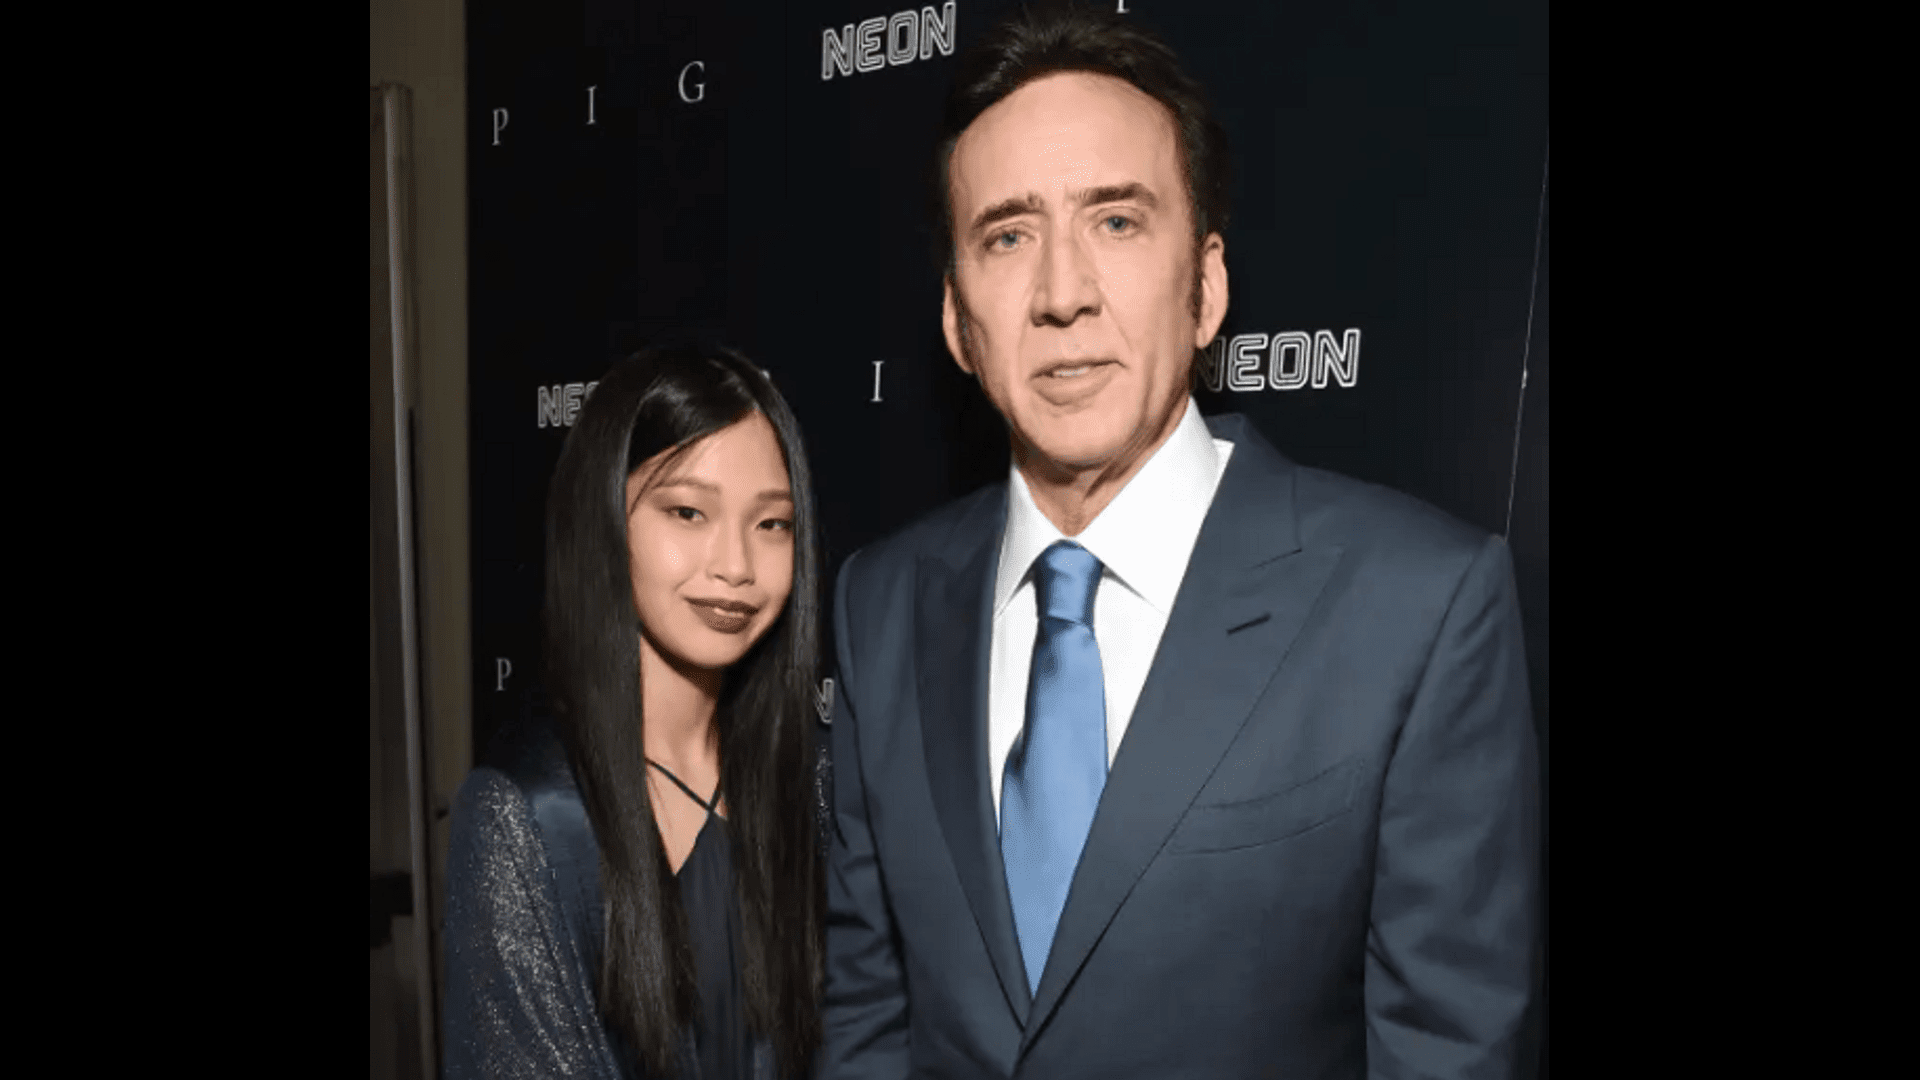 ”nicolas-cage-reveals-the-secret-of-his-first-daughters-name”